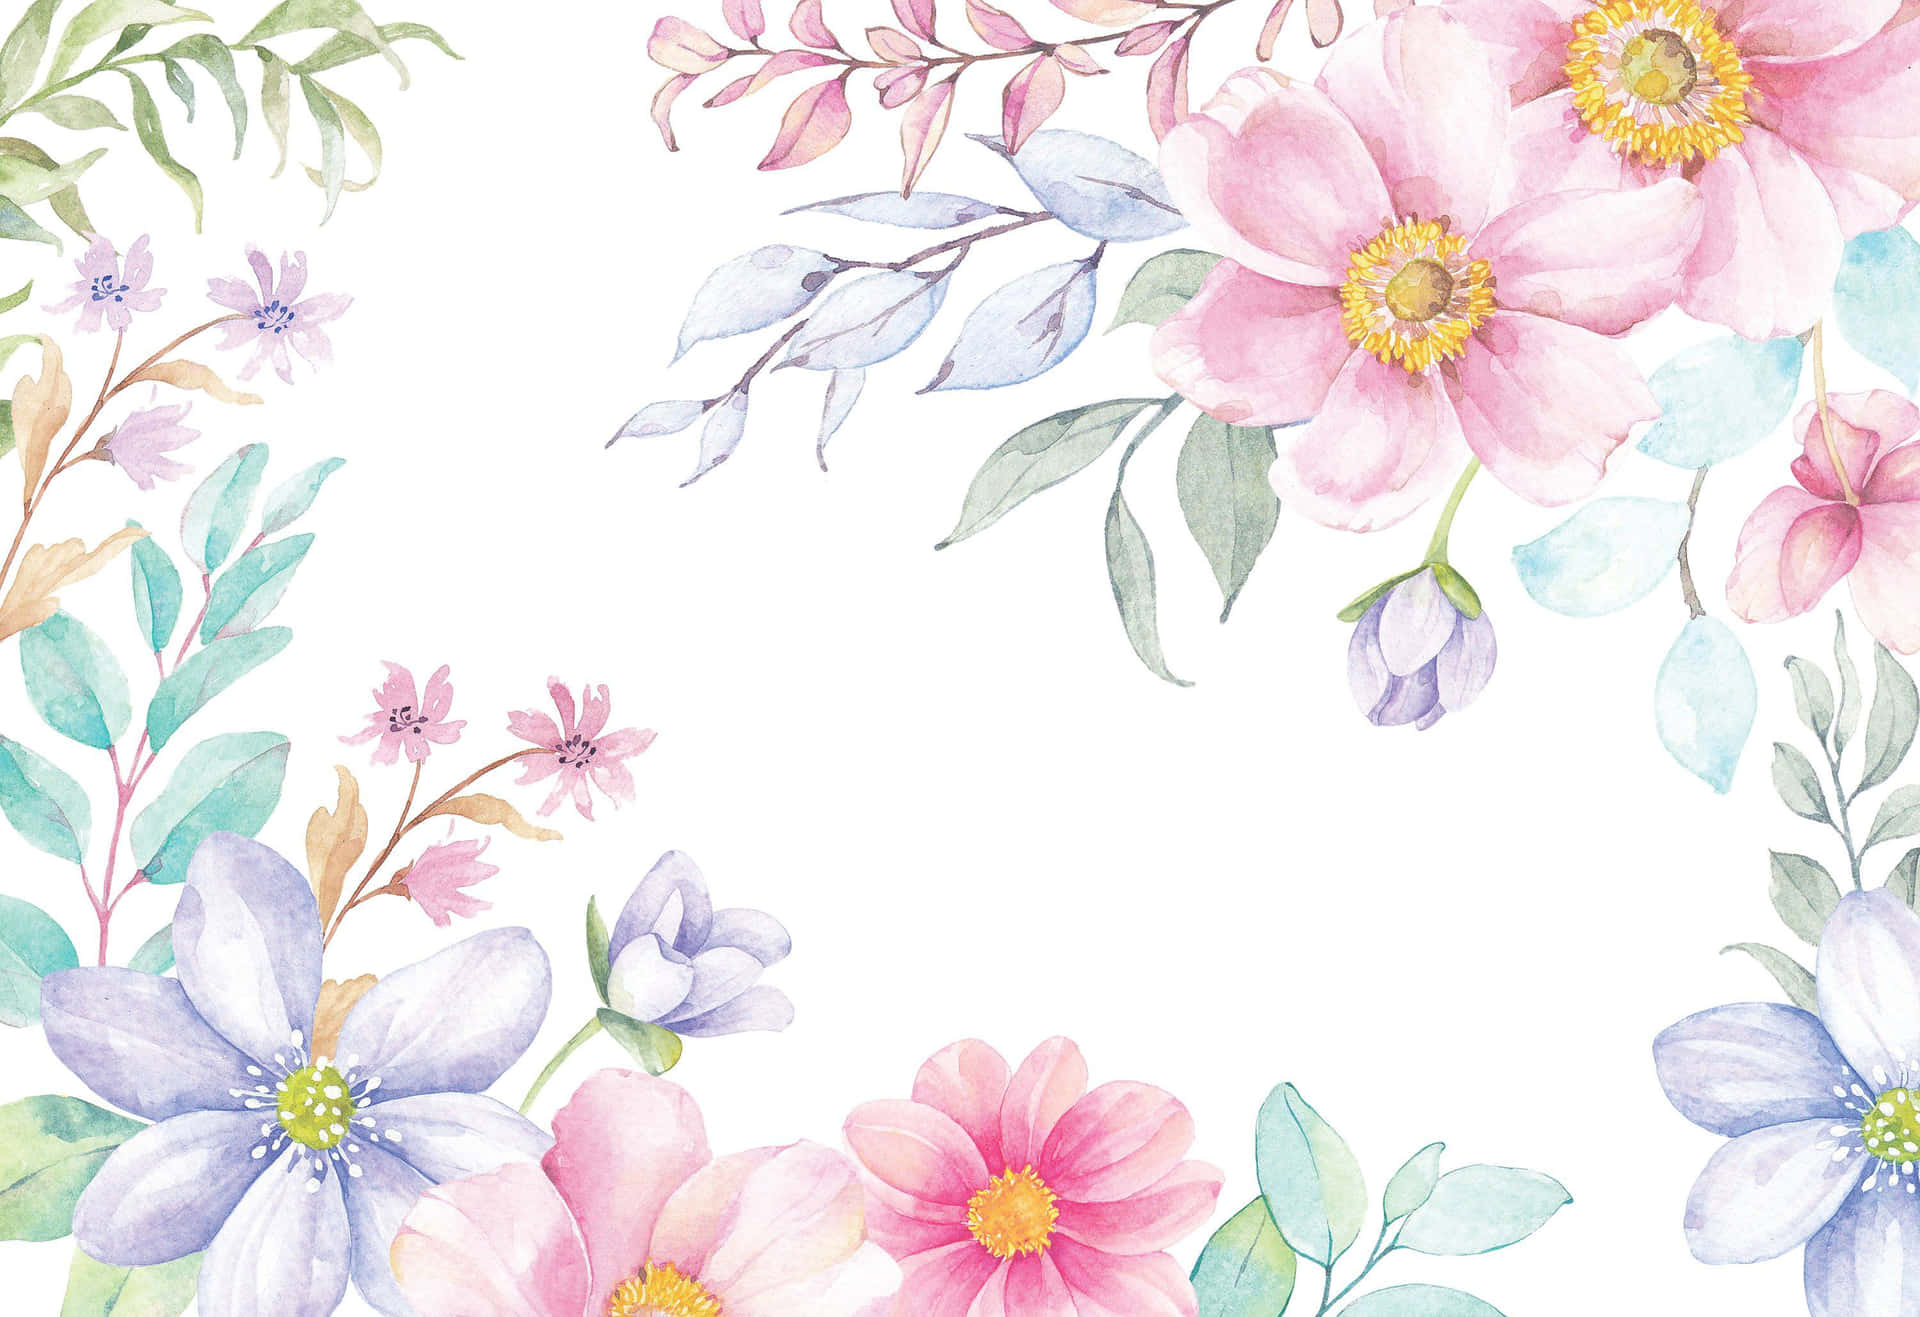 Watercolor Floral Frame With Leaves And Flowers Wallpaper